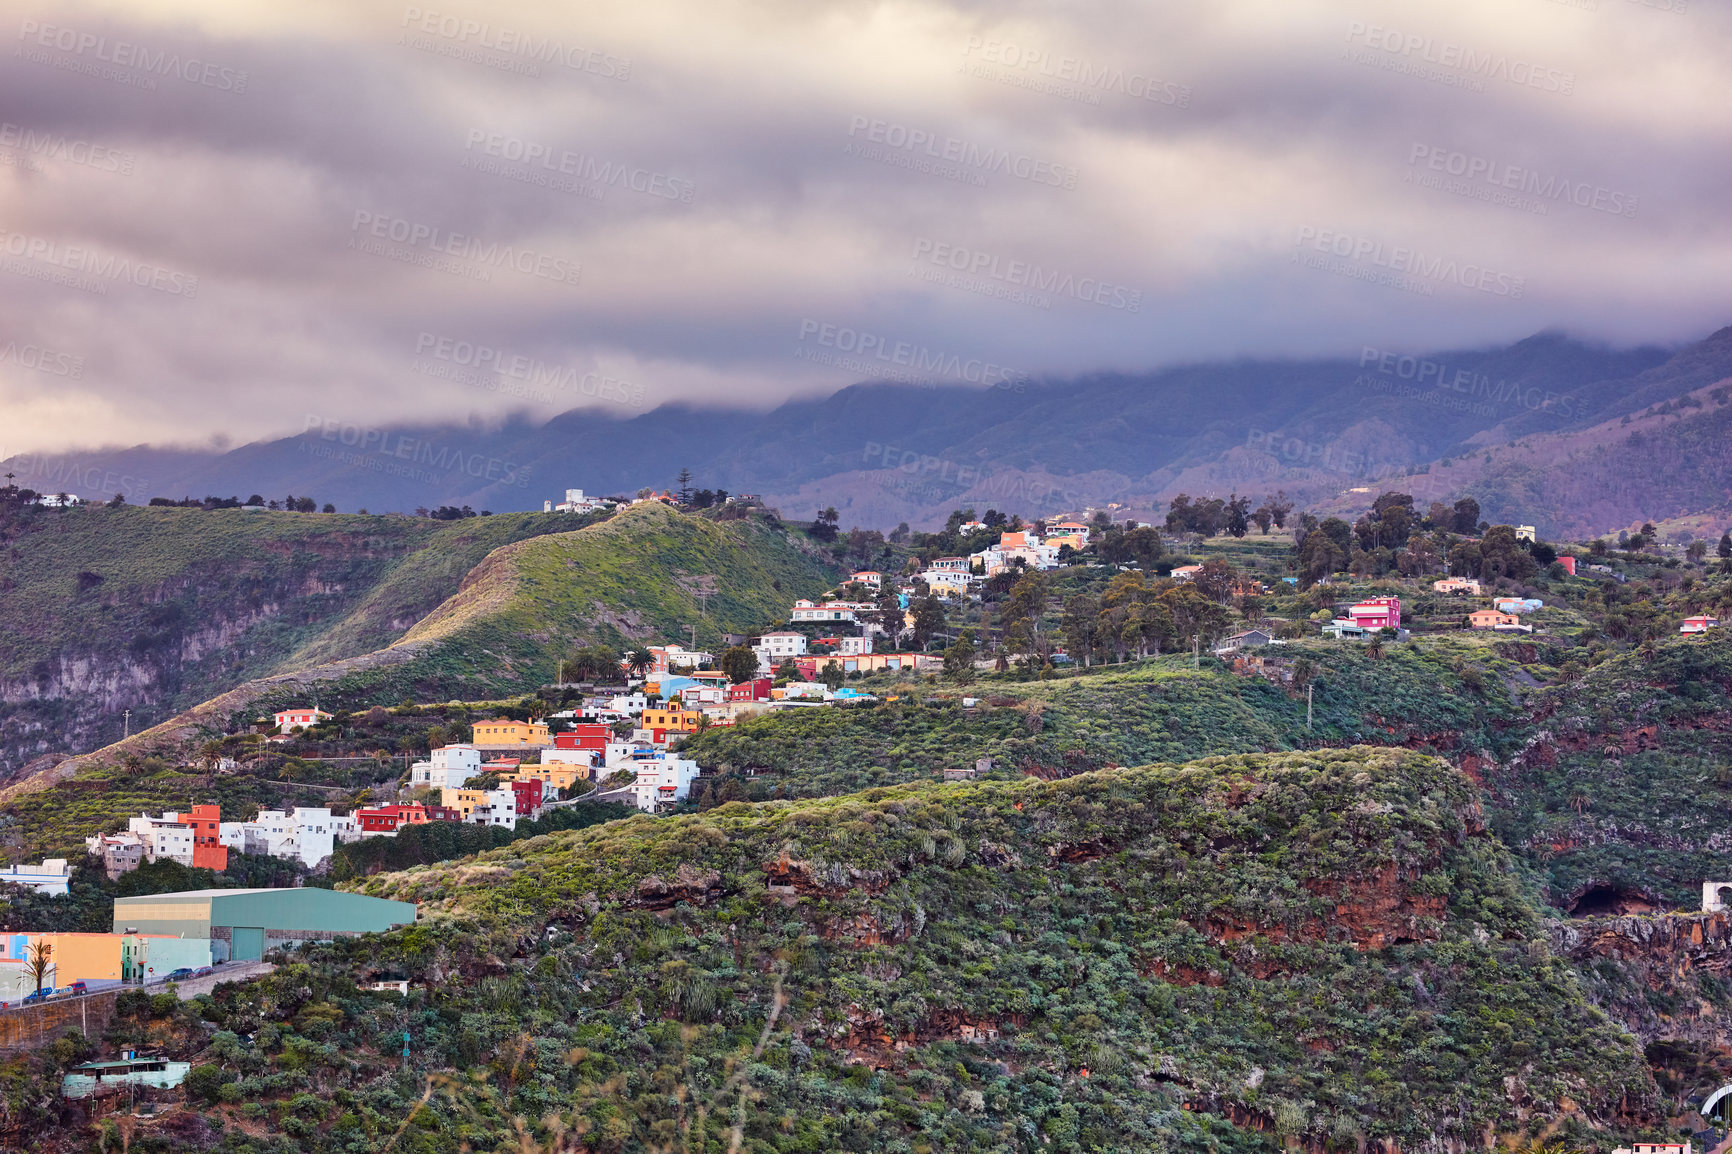 Buy stock photo The small town of Santa Cruz de La Palma in Spain. Beautiful landscape view of a city in the mountains and in the countryside. Scenic view of a residential area on an island for tourism and traveling